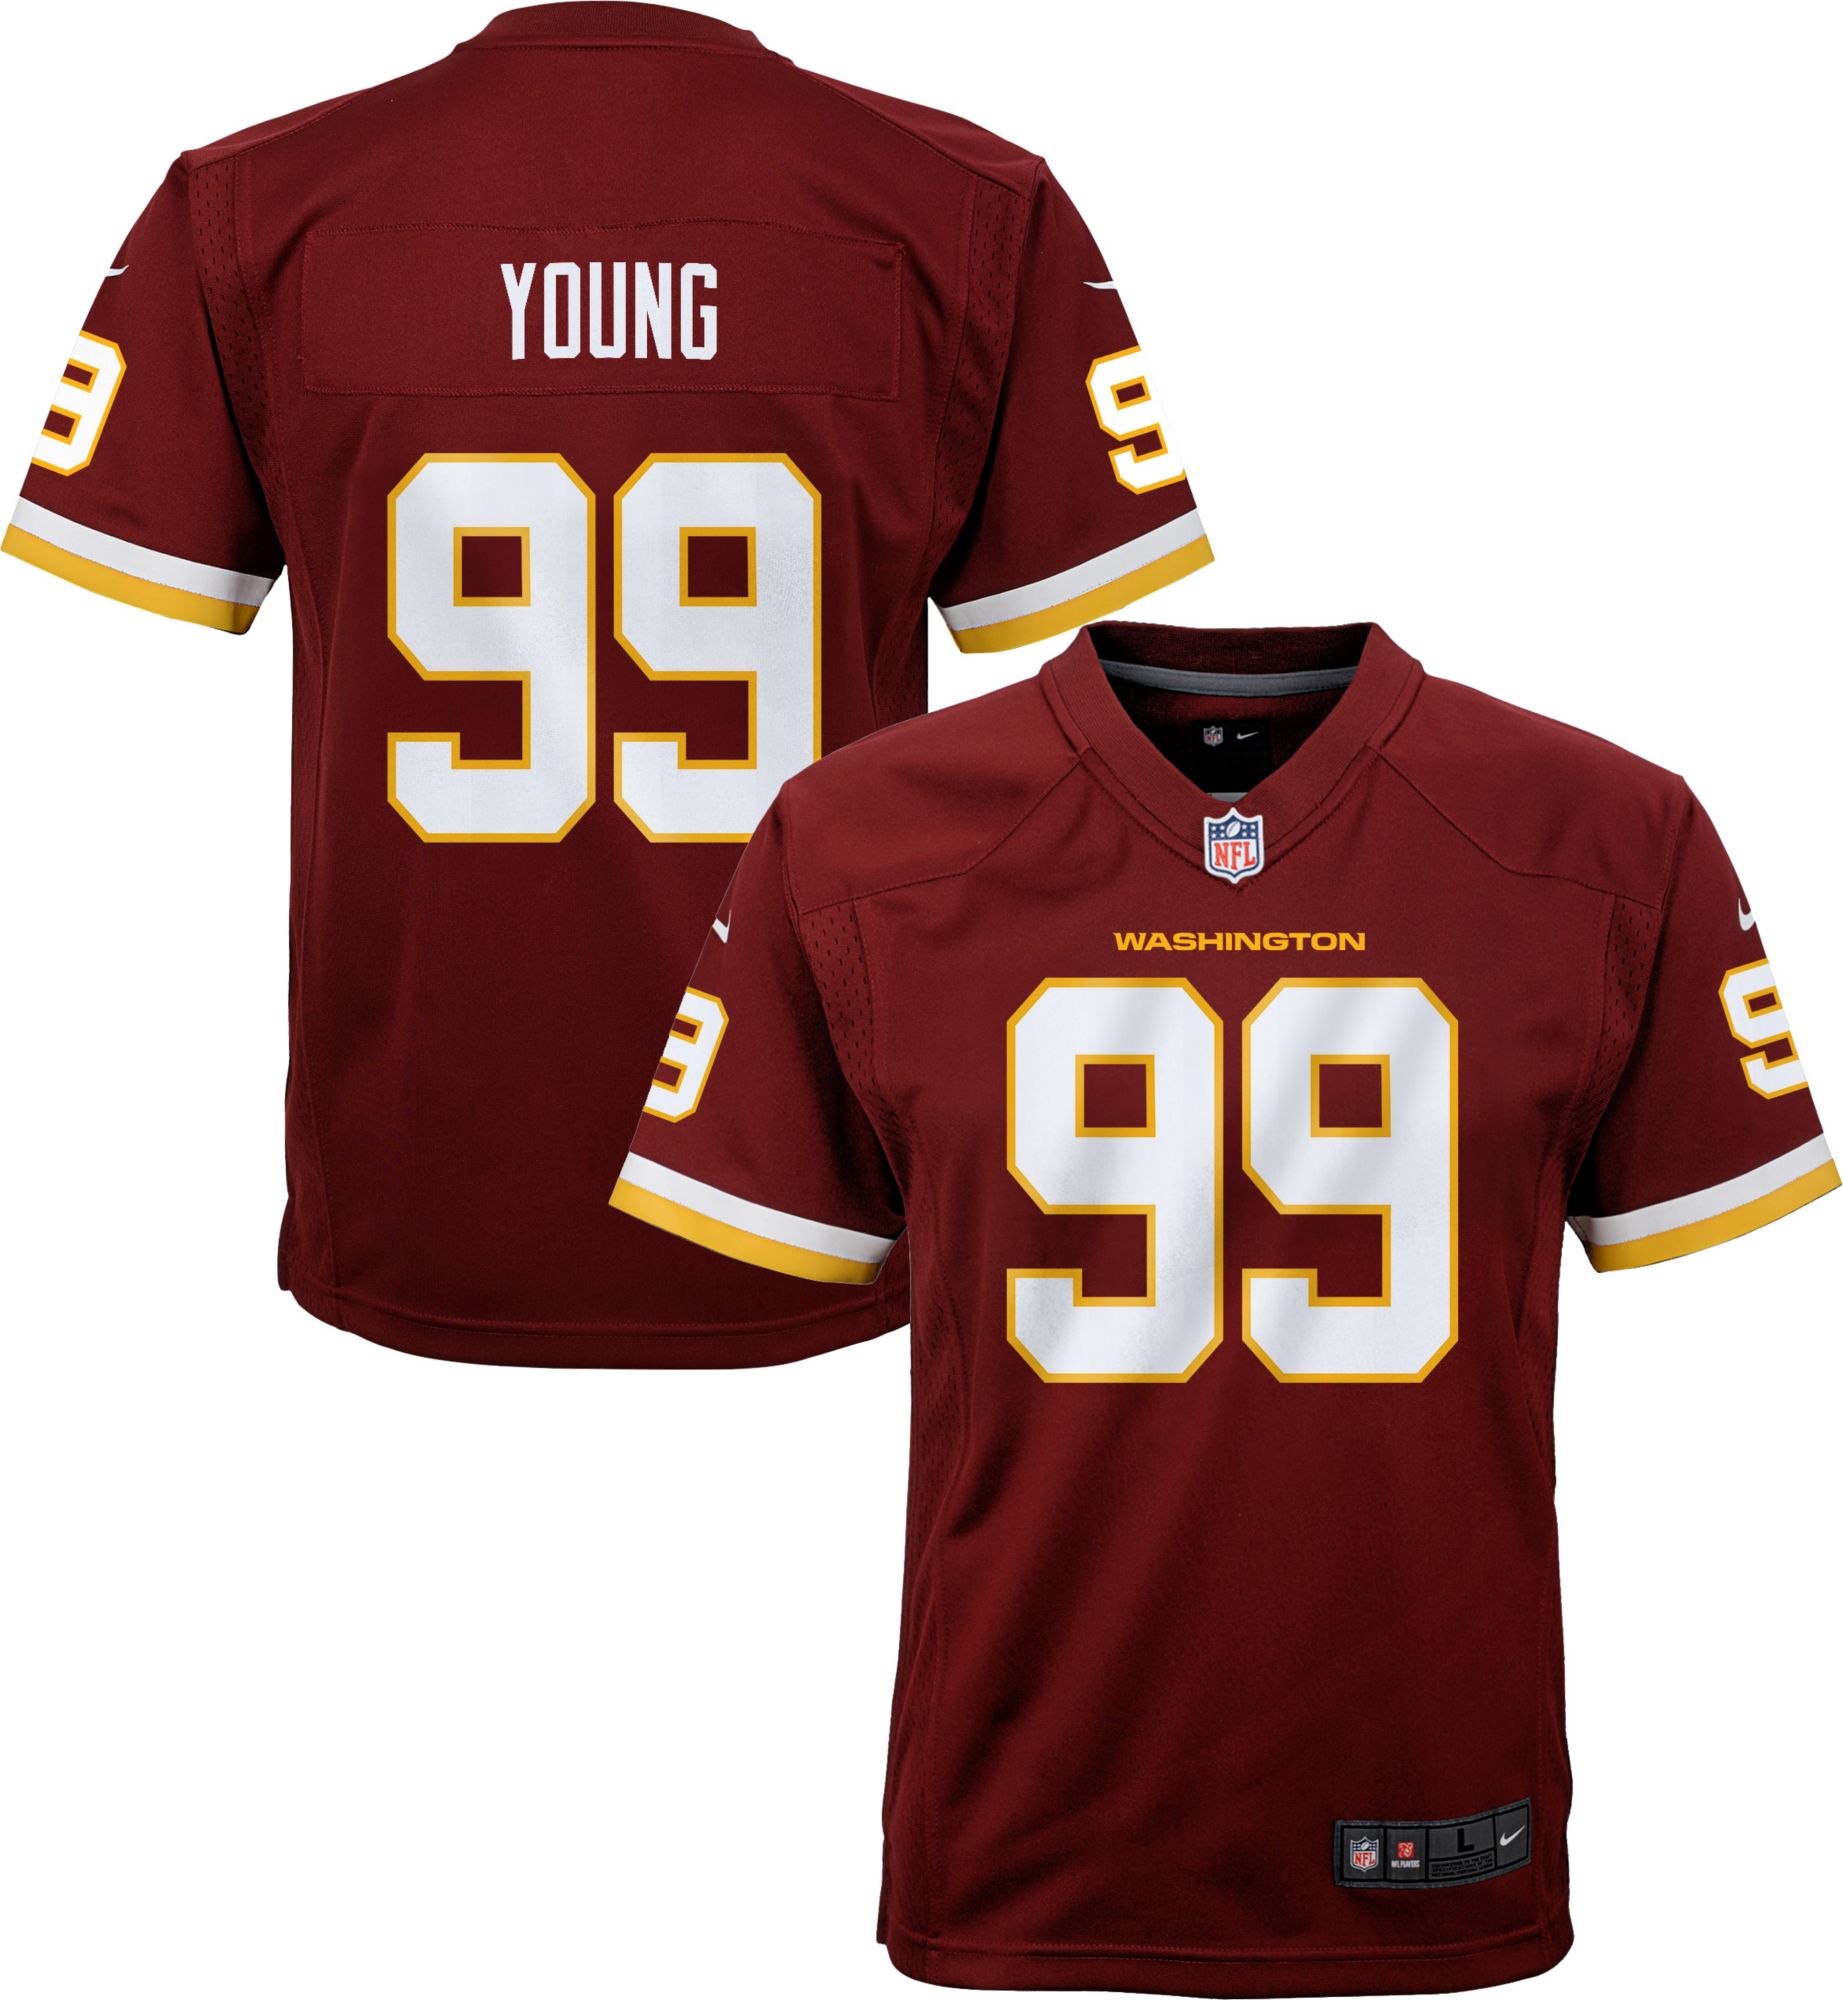 chase young 99 jersey